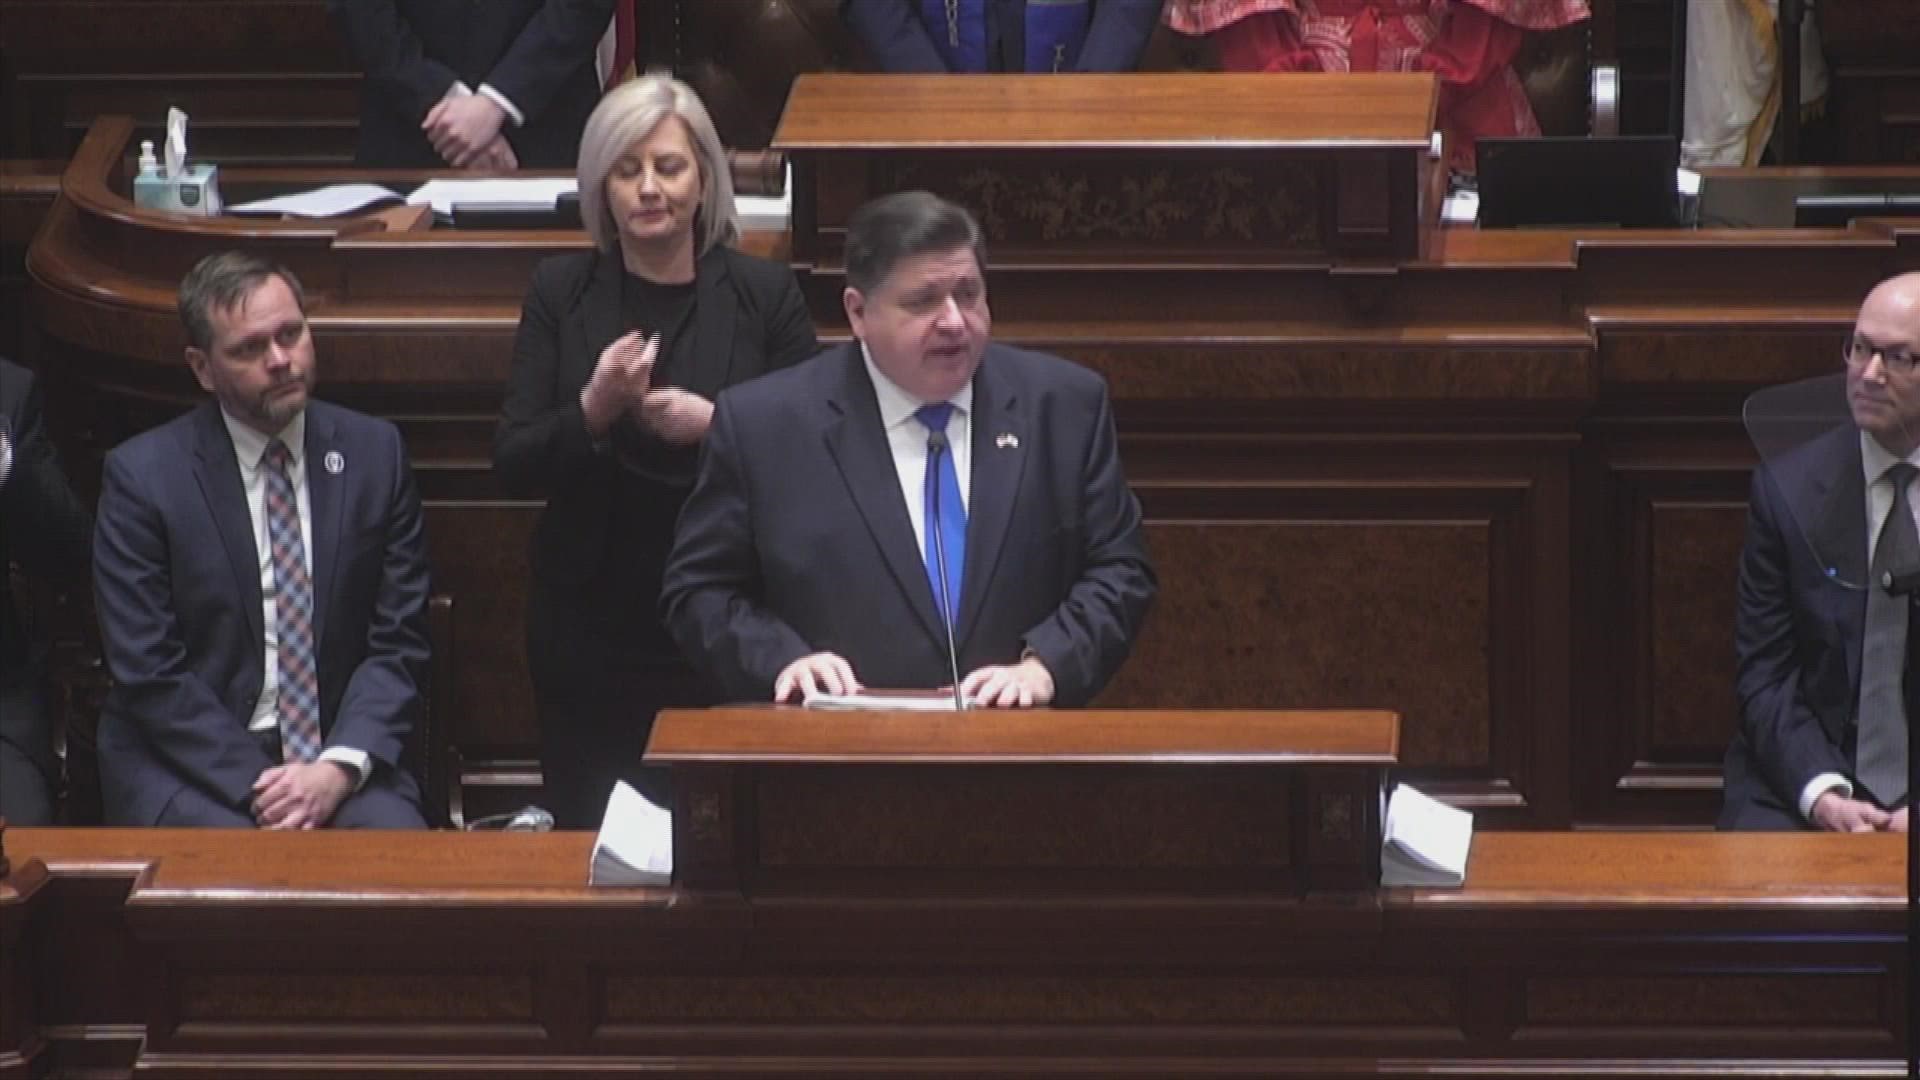 Pritzker said the FY24 budget includes $3 million for Healthcare Worker Loan Repayment and Scholarship programs.